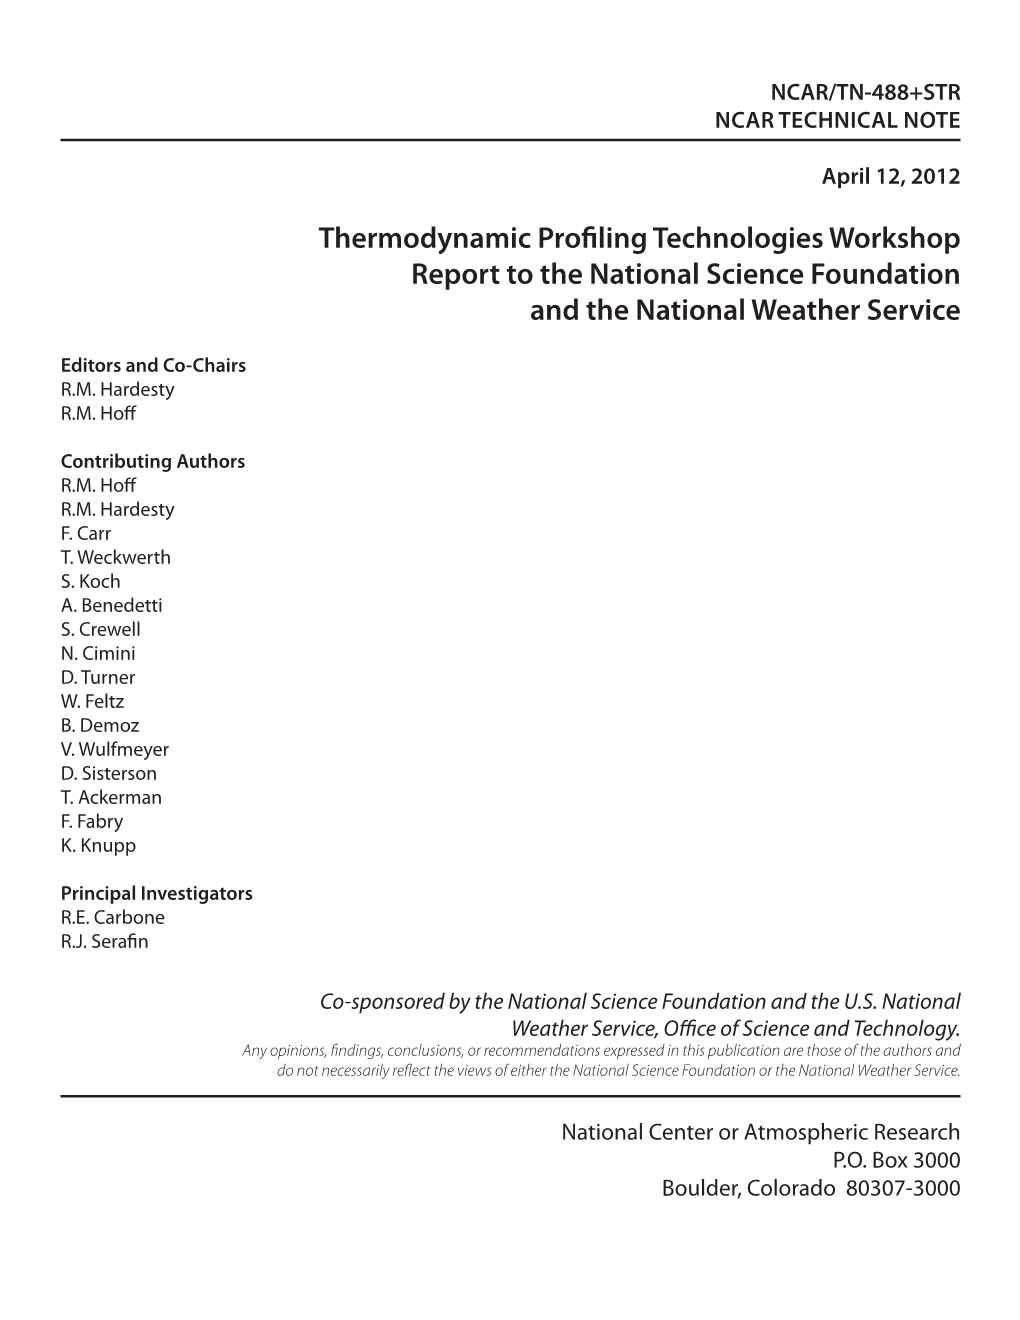 Thermodynamic Profiling Technologies Workshop Report to the National Science Foundation and the National Weather Service